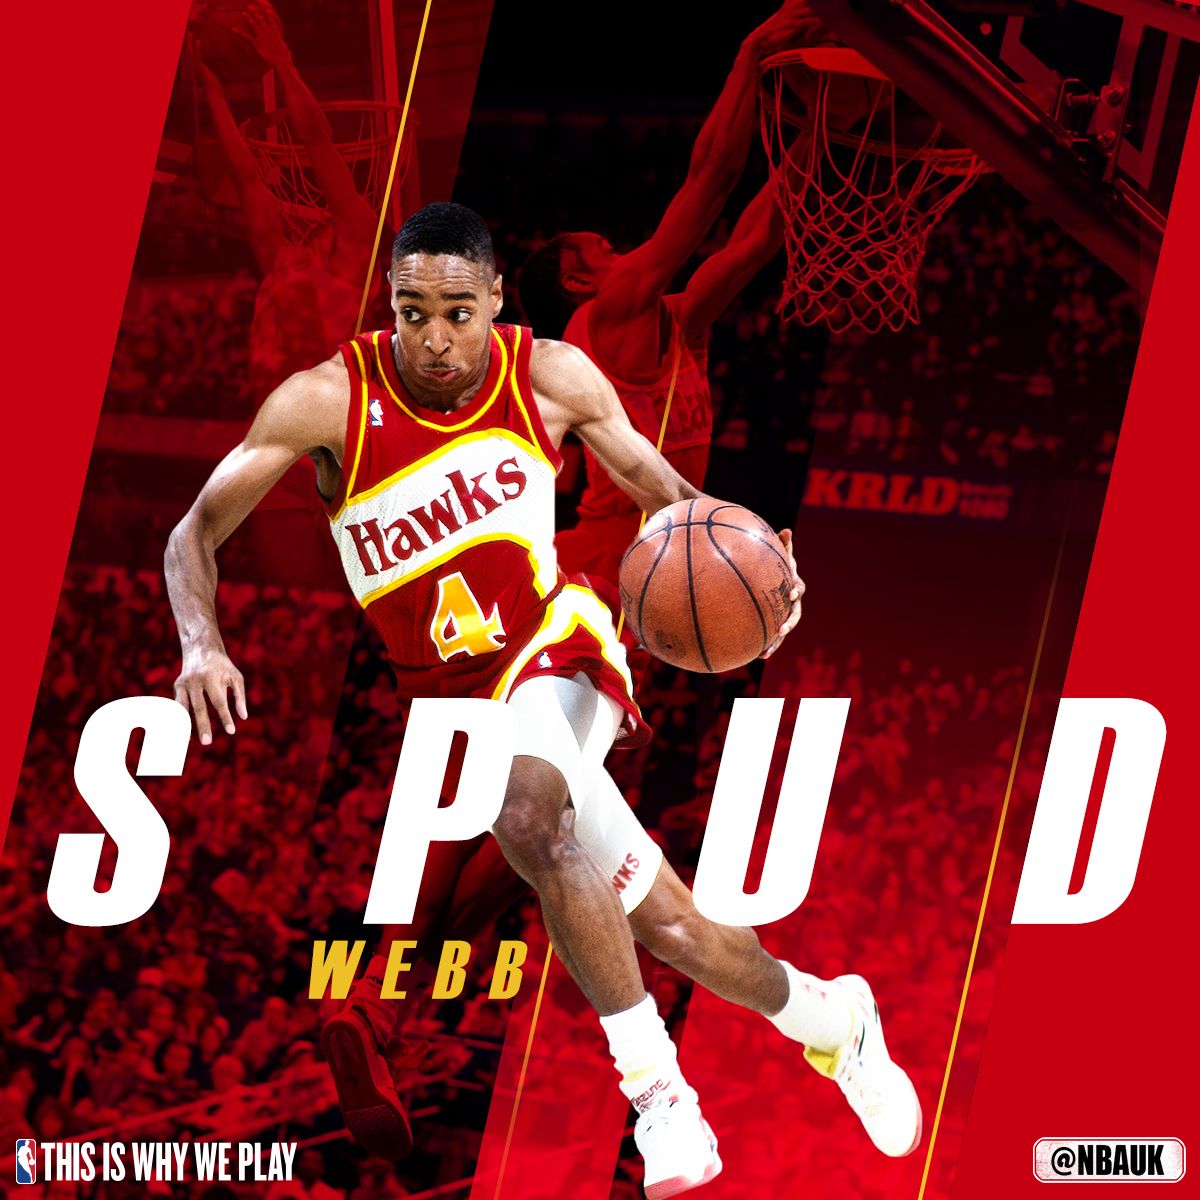   Join us as we wish the 1986 Slam Dunk Champion Spud Webb, a very happy birthday! 